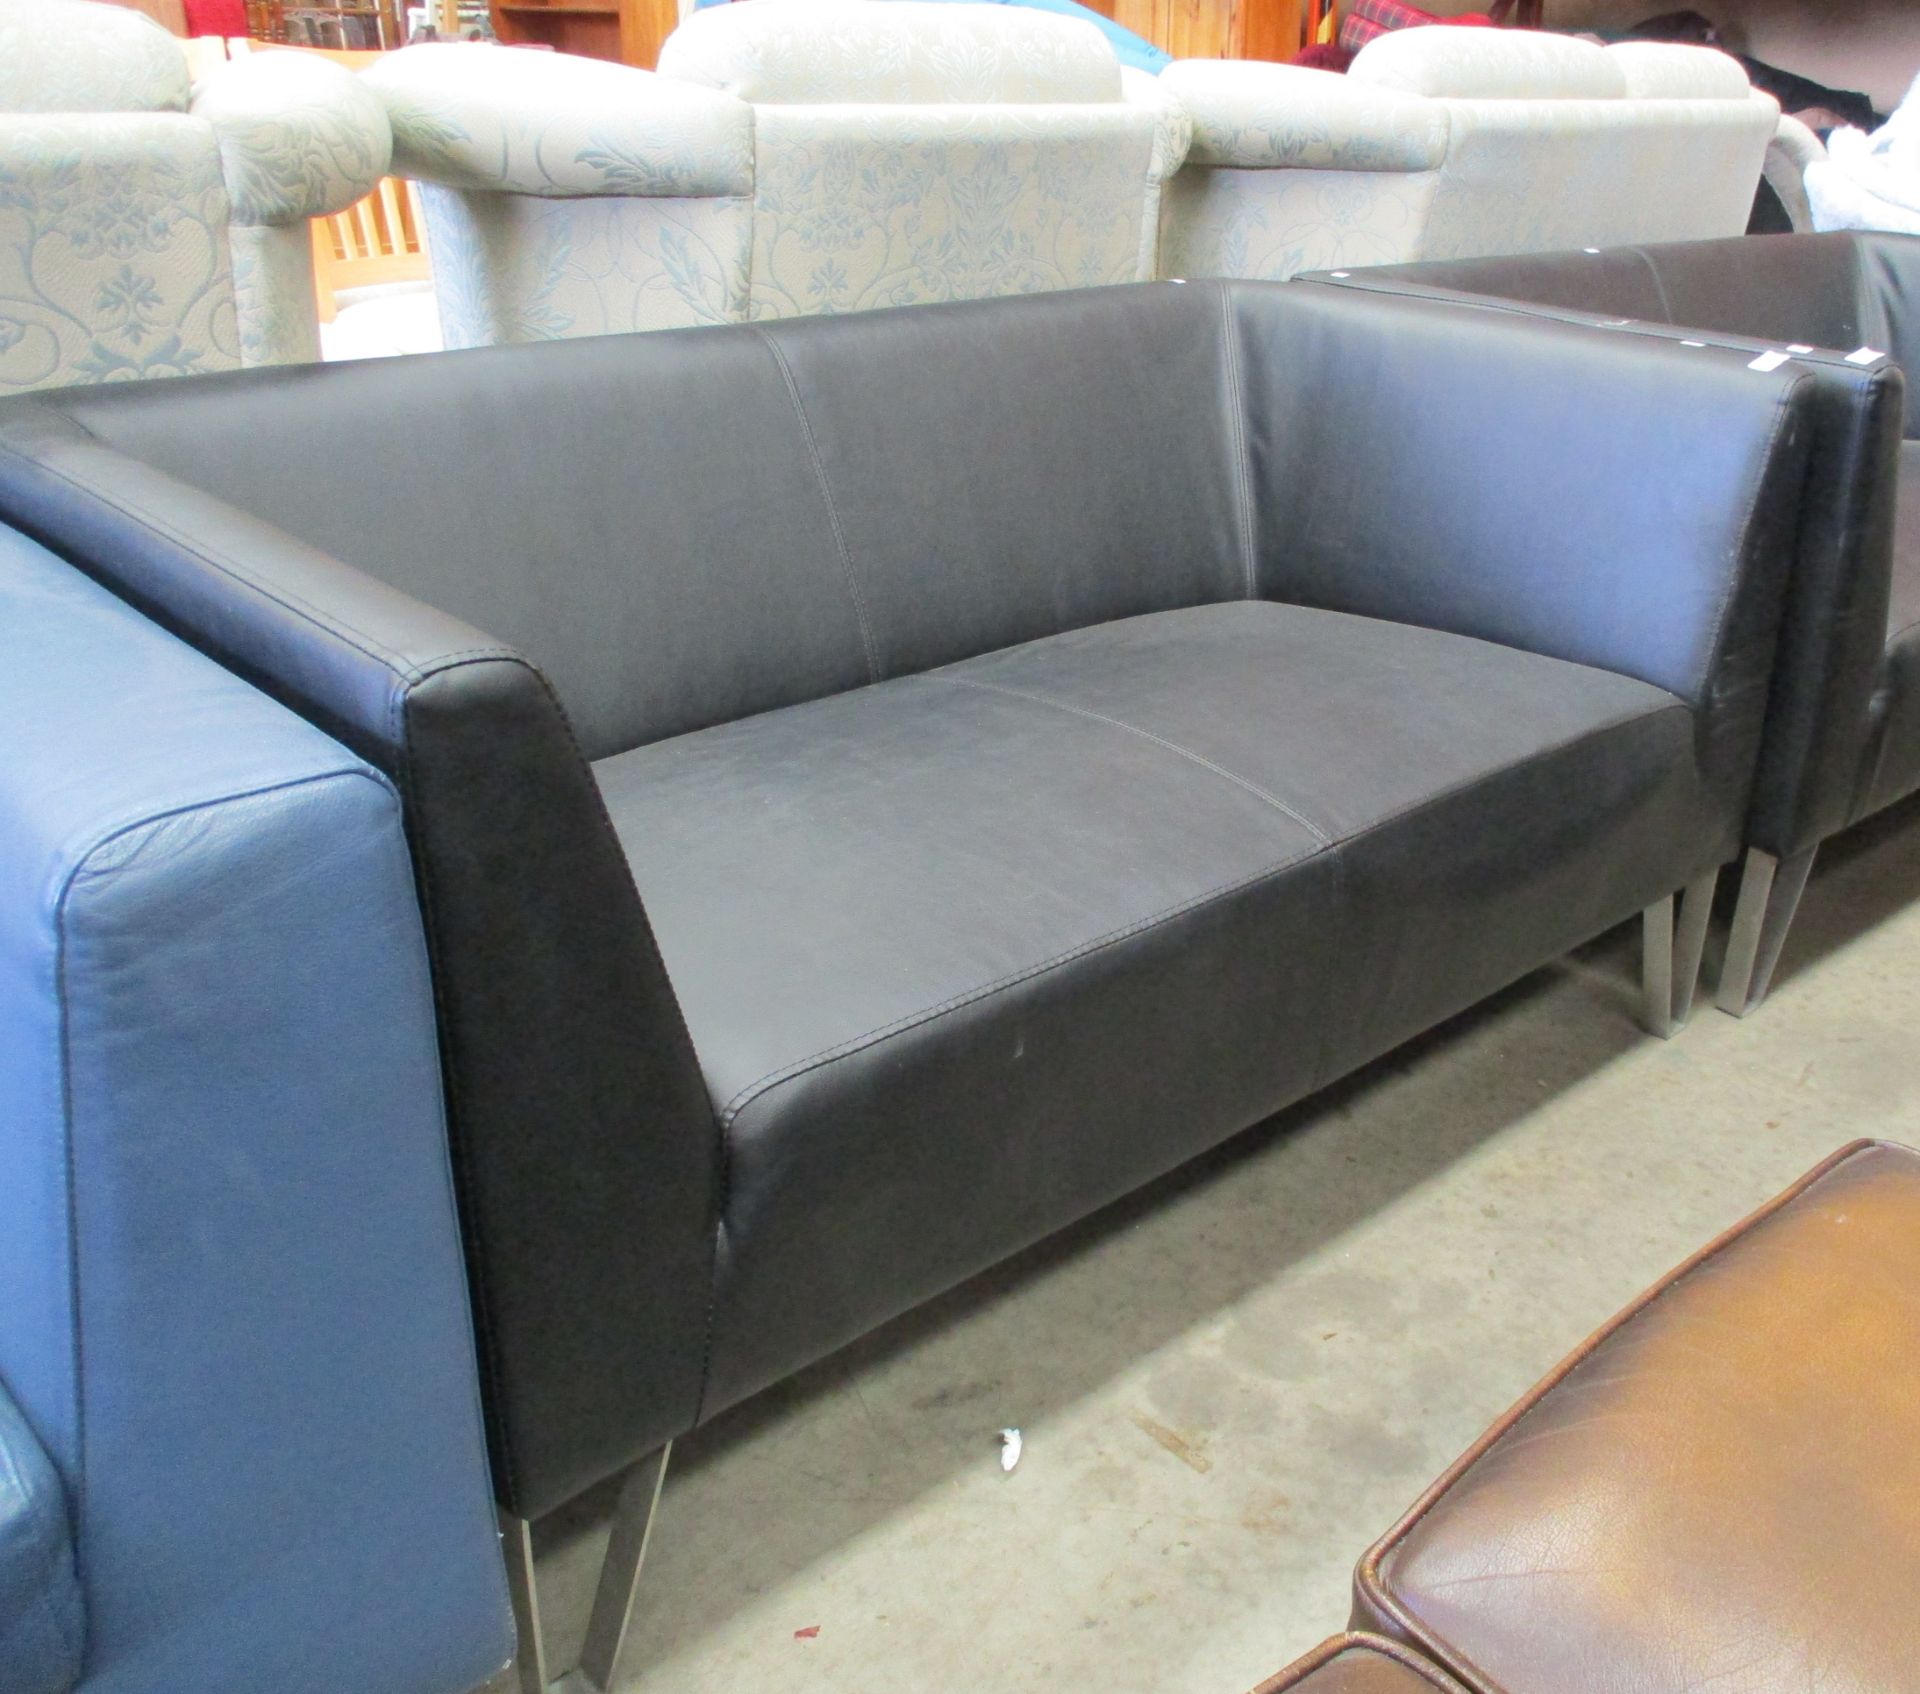 A black vinyl two seater settee